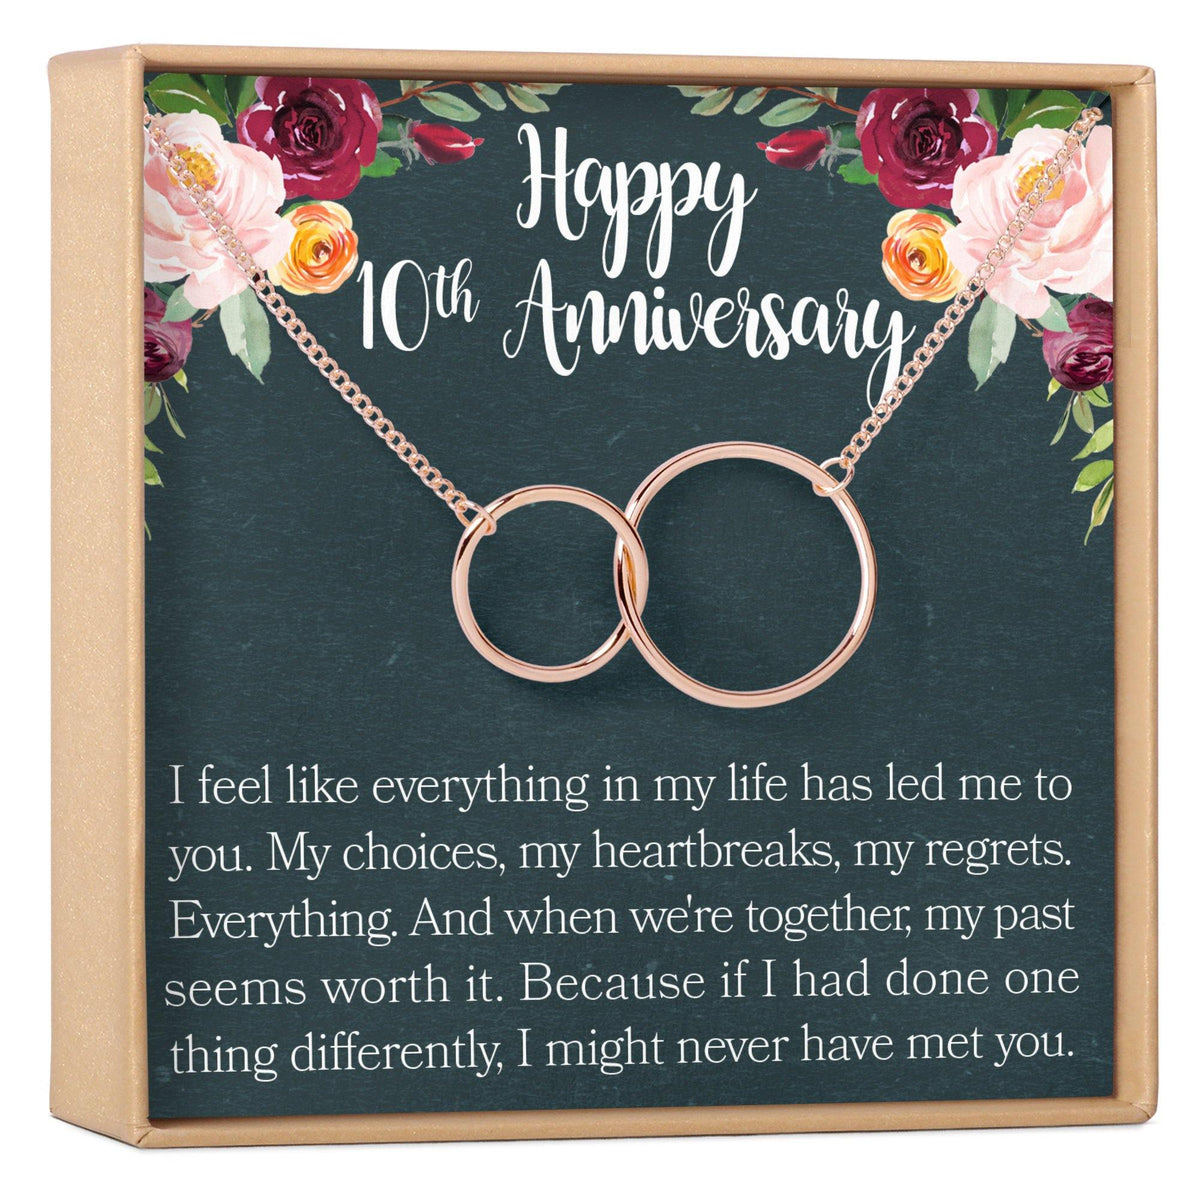 10th Anniversary Necklace - Dear Ava, Jewelry / Necklaces / Pendants